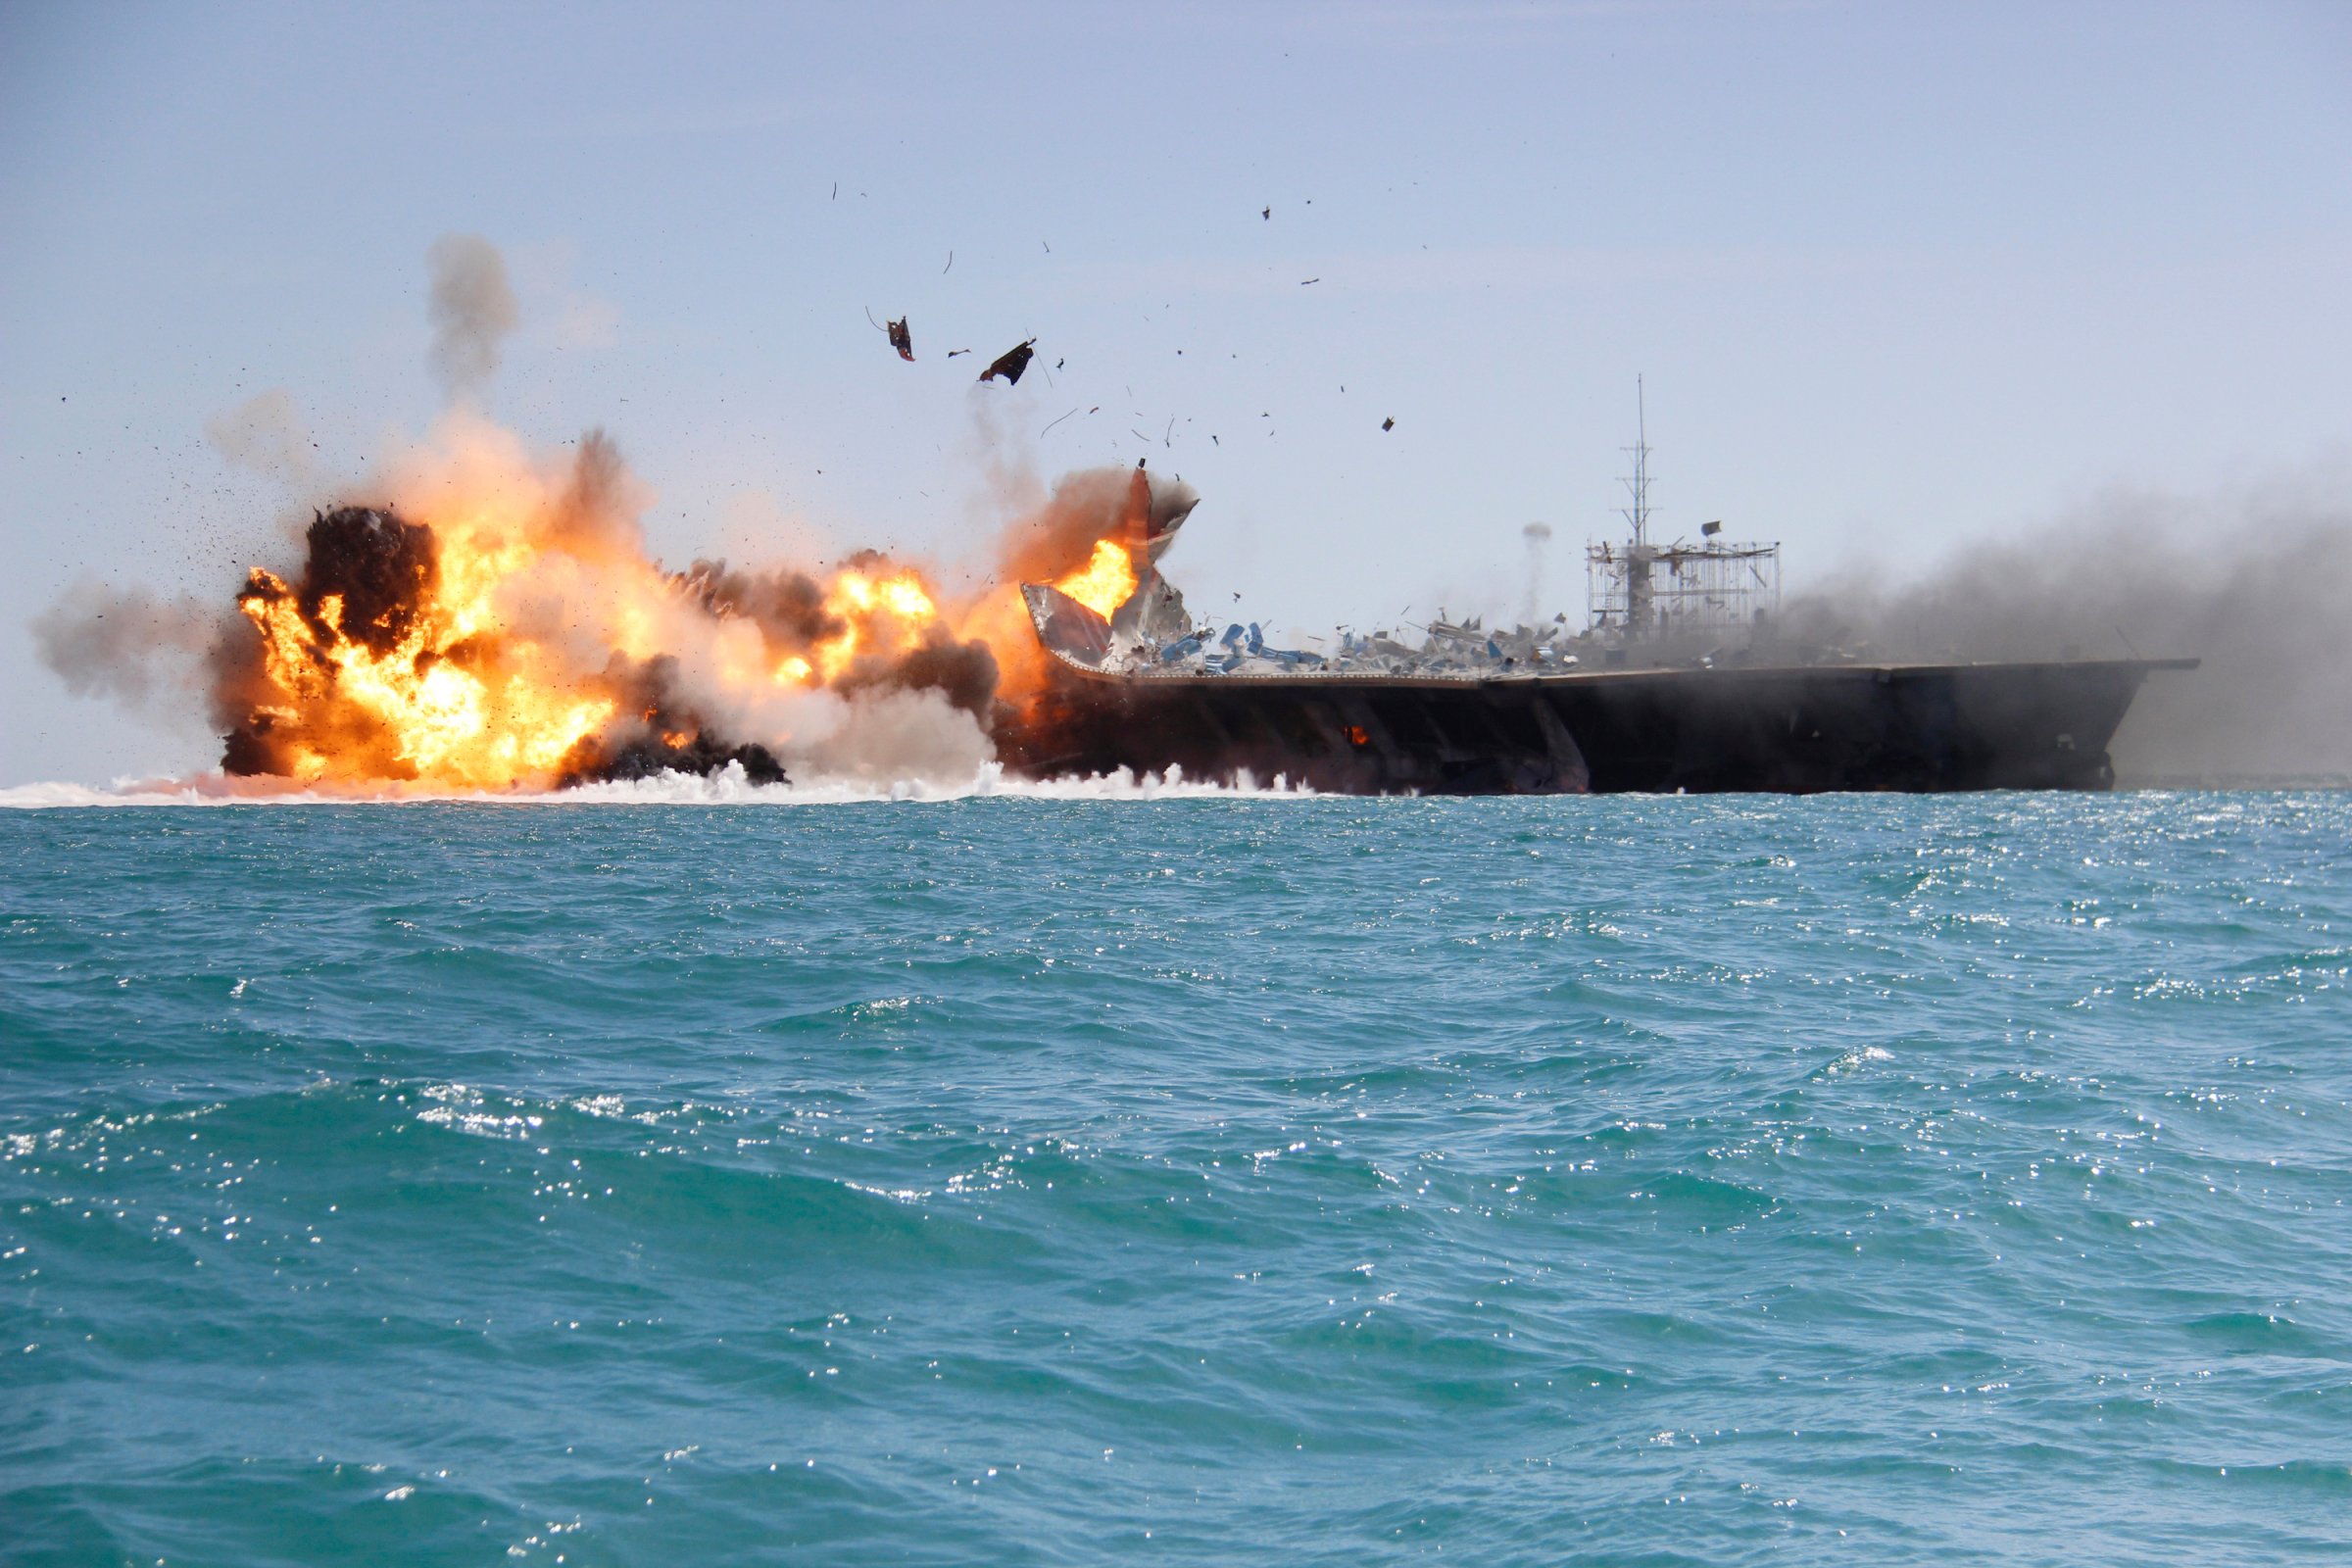 A replica of a U.S. aircraft carrier is exploded by the Revolutionary Guard during naval drills near the entrance of the Persian Gulf, Iran on Feb. 25, 2015.